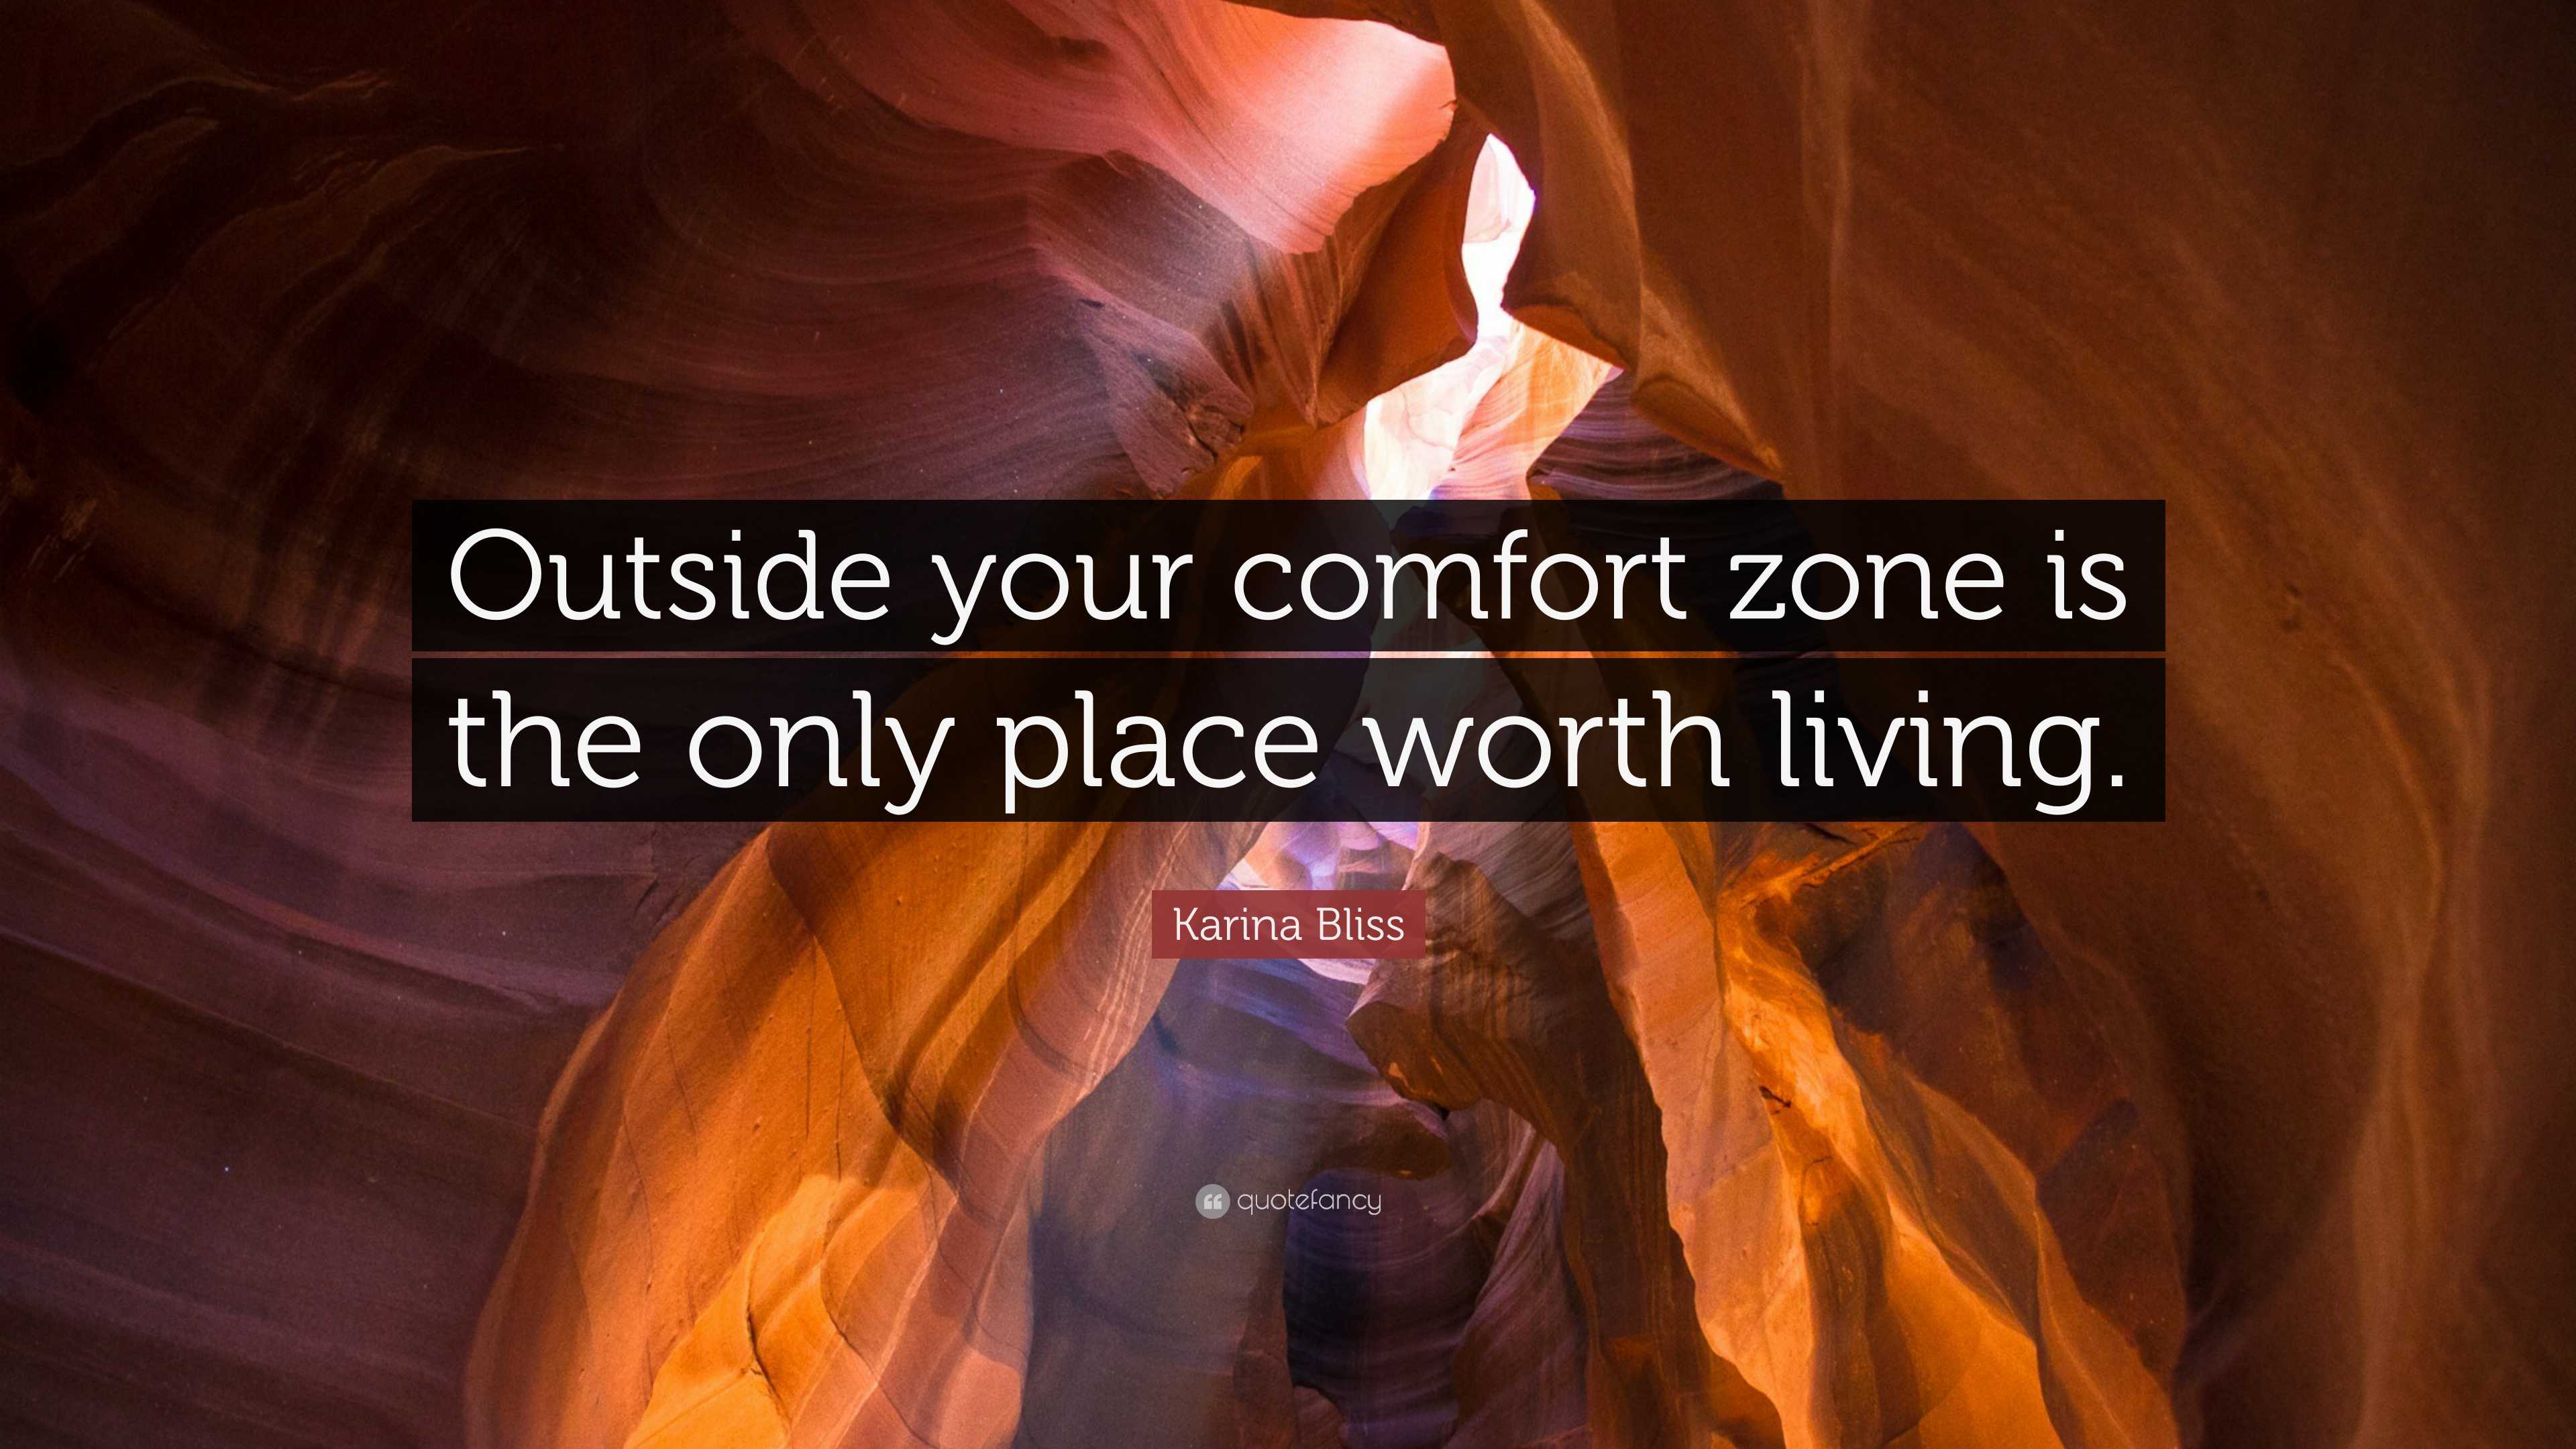 Karina Bliss Quote: “Outside your comfort zone is the only place